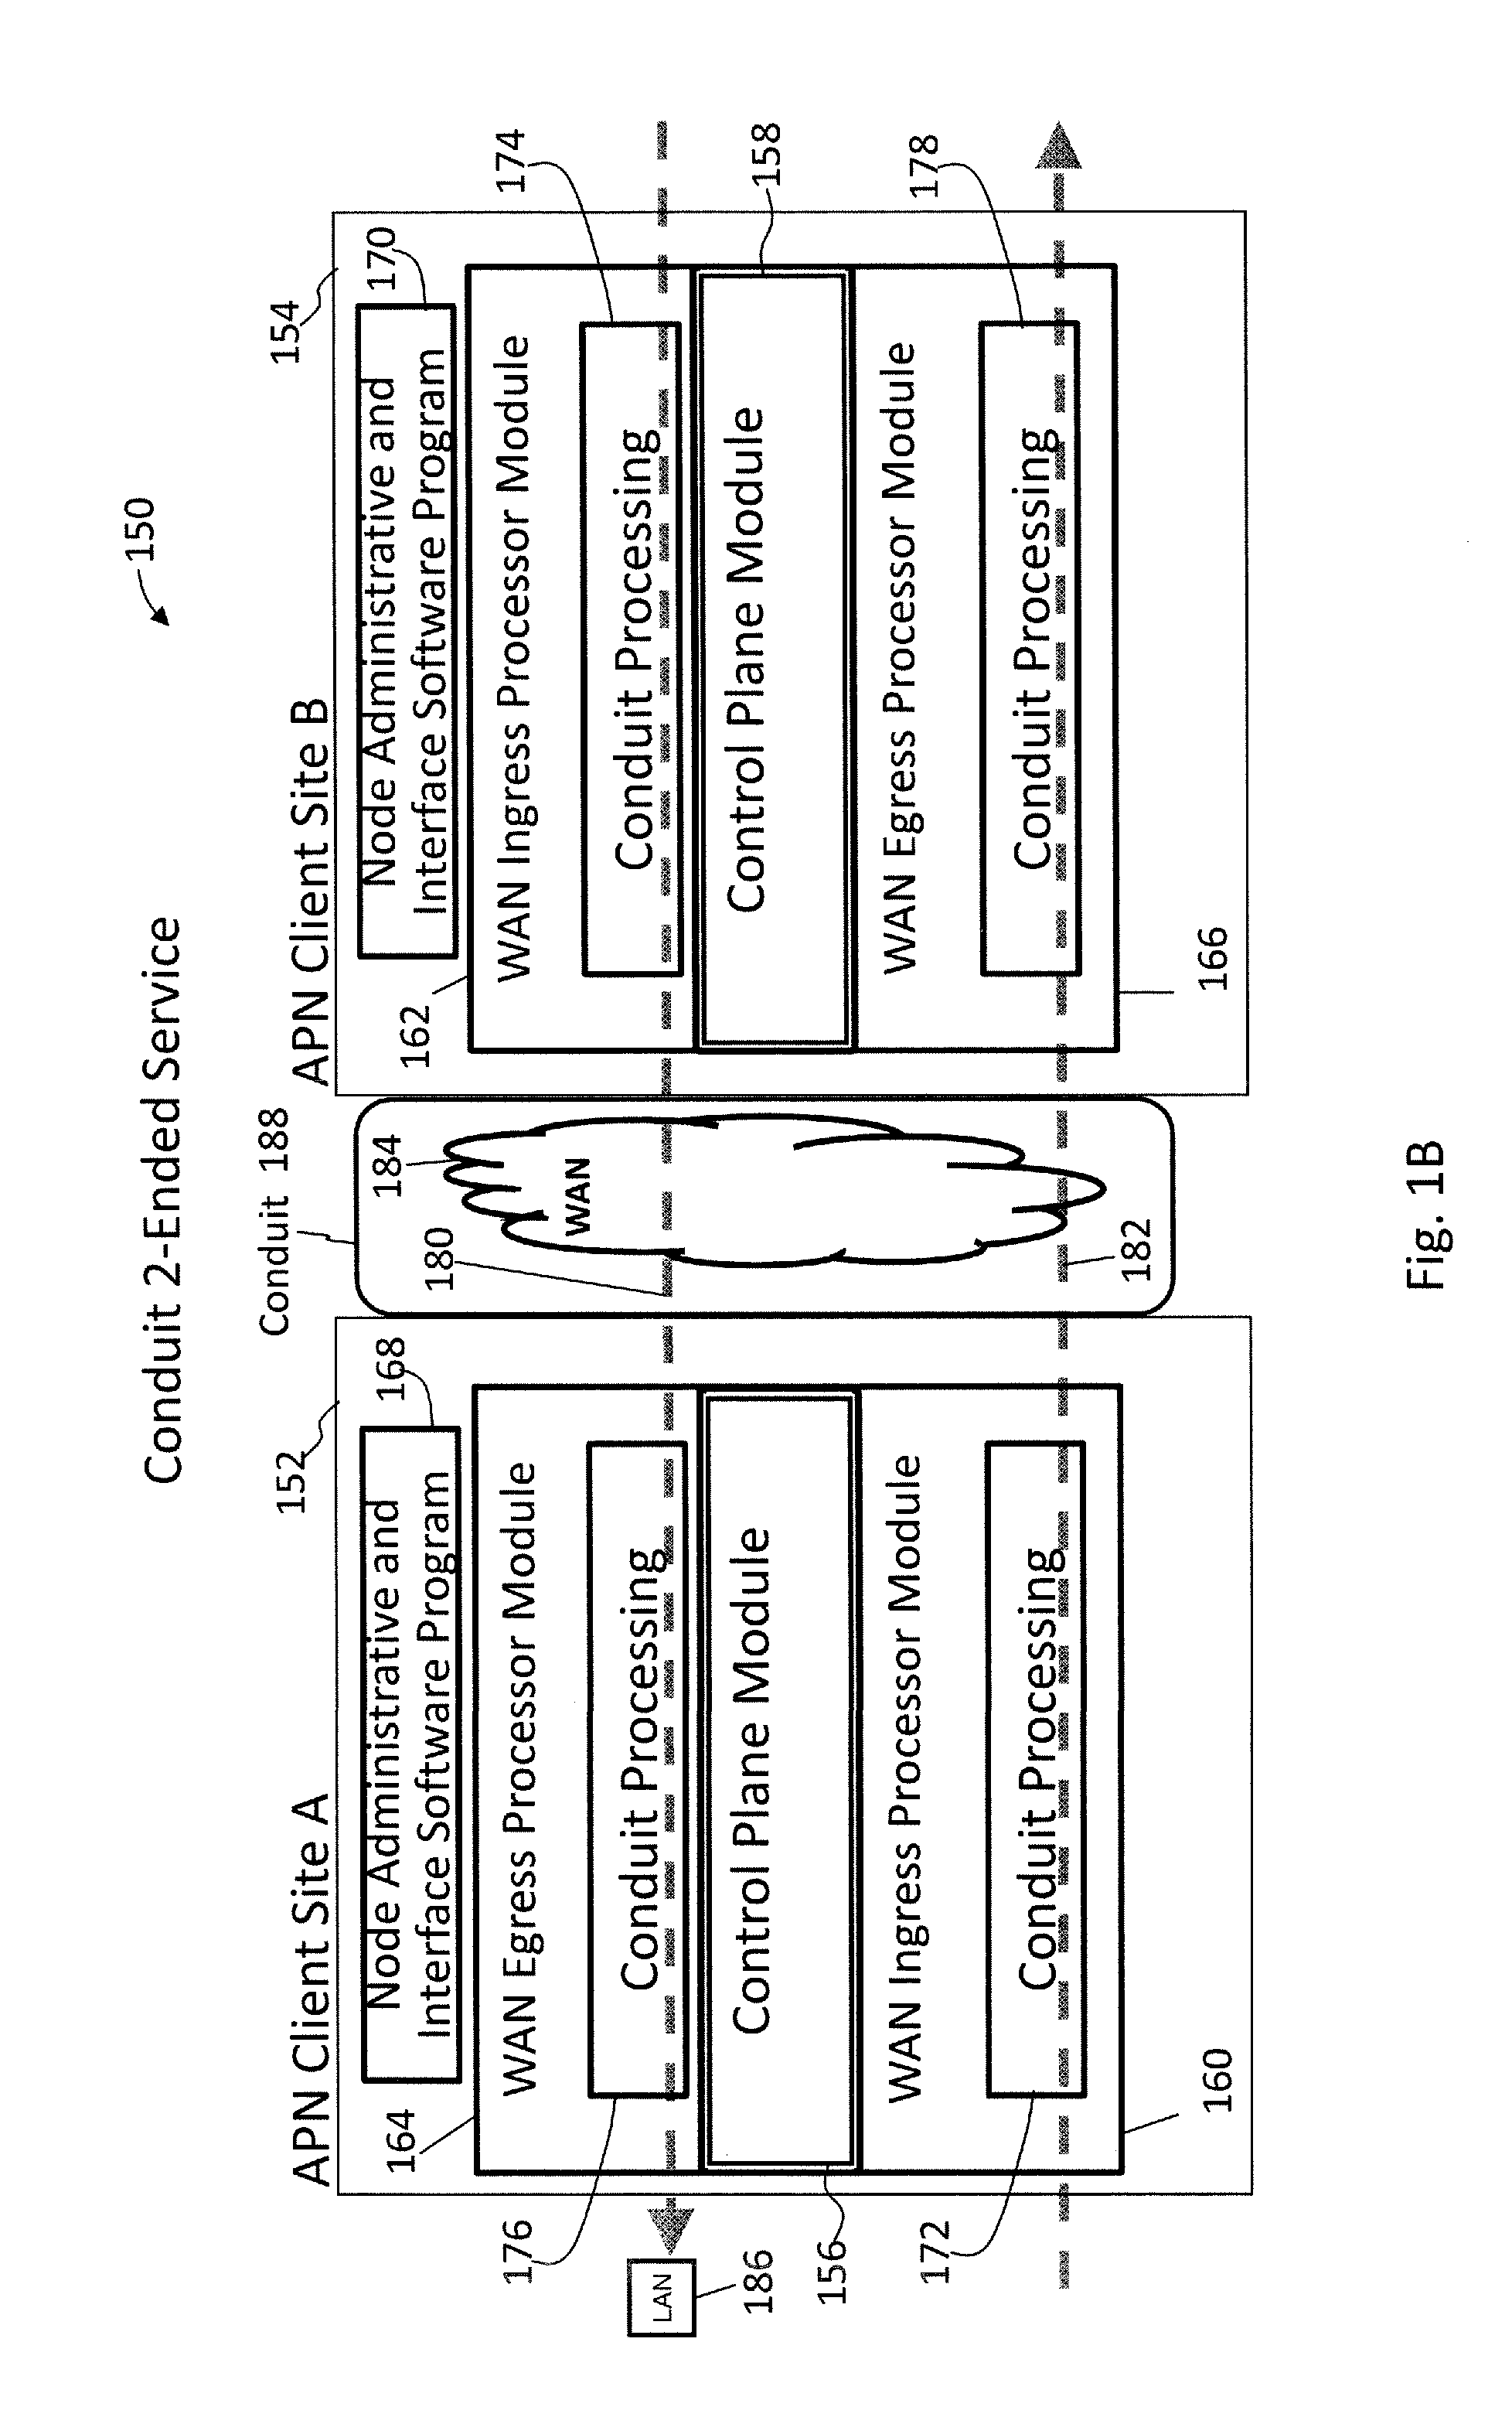 Methods and Apparatus for Providing Adaptive Private Network Centralized Management System Time Correlated Playback of Network Traffic